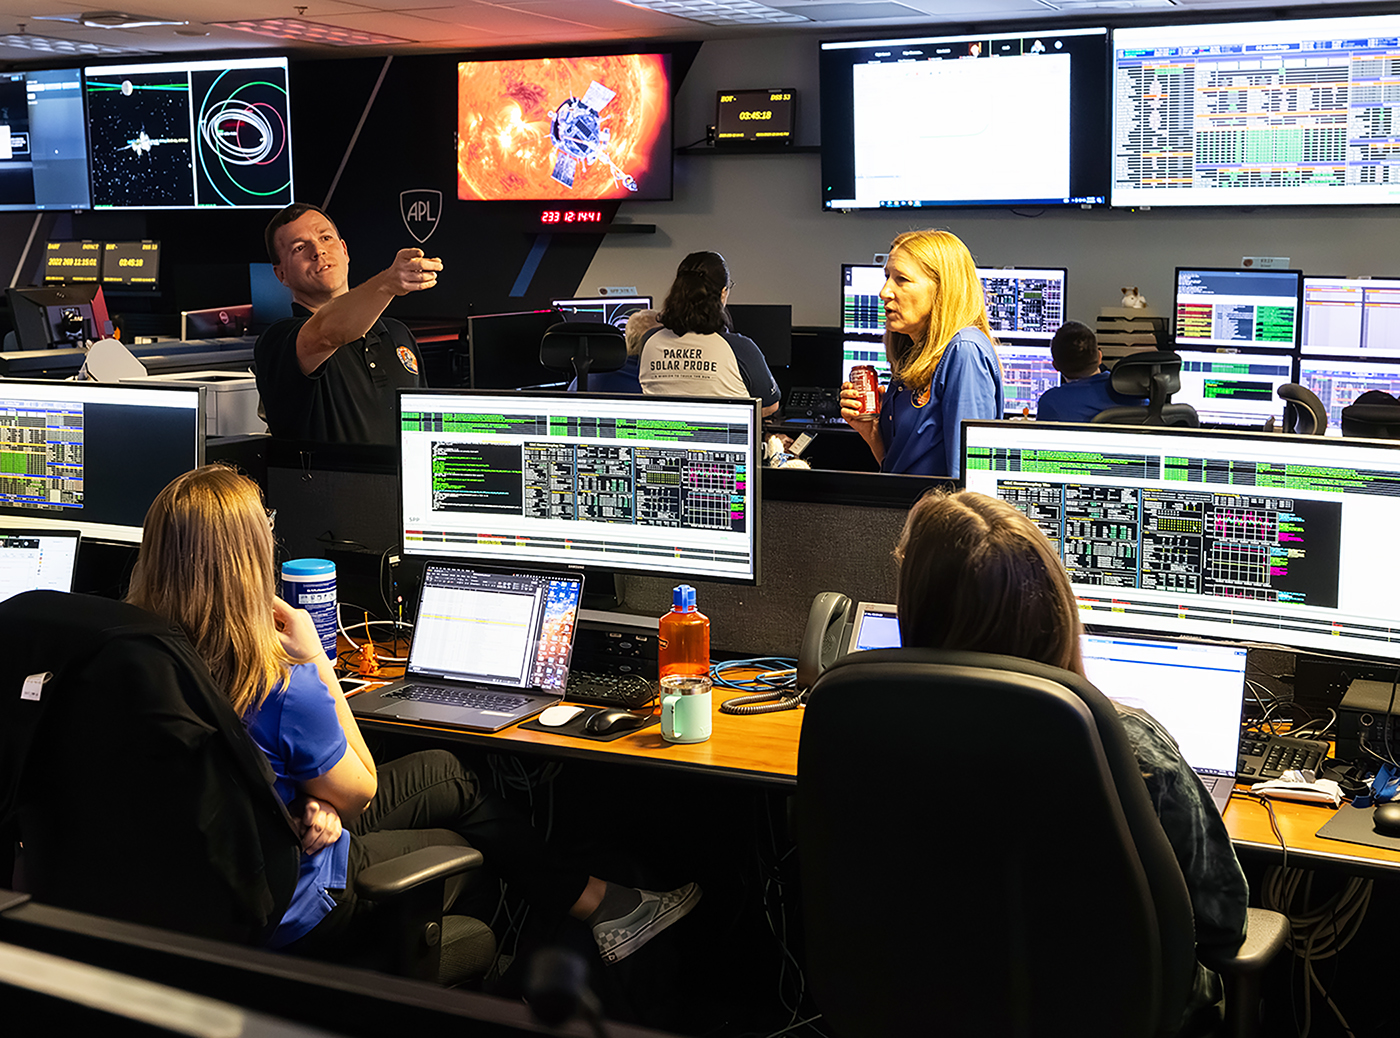 Standing, from left, Parker Solar Probe Mission Operations Manager Nick Pinkine and Project Manager Helene Winters discuss the progress of Parker's gravity assist flyby of Venus with members of the spacecraft operations team at the Johns Hopkins Applied Physics Laboratory on Aug. 21.